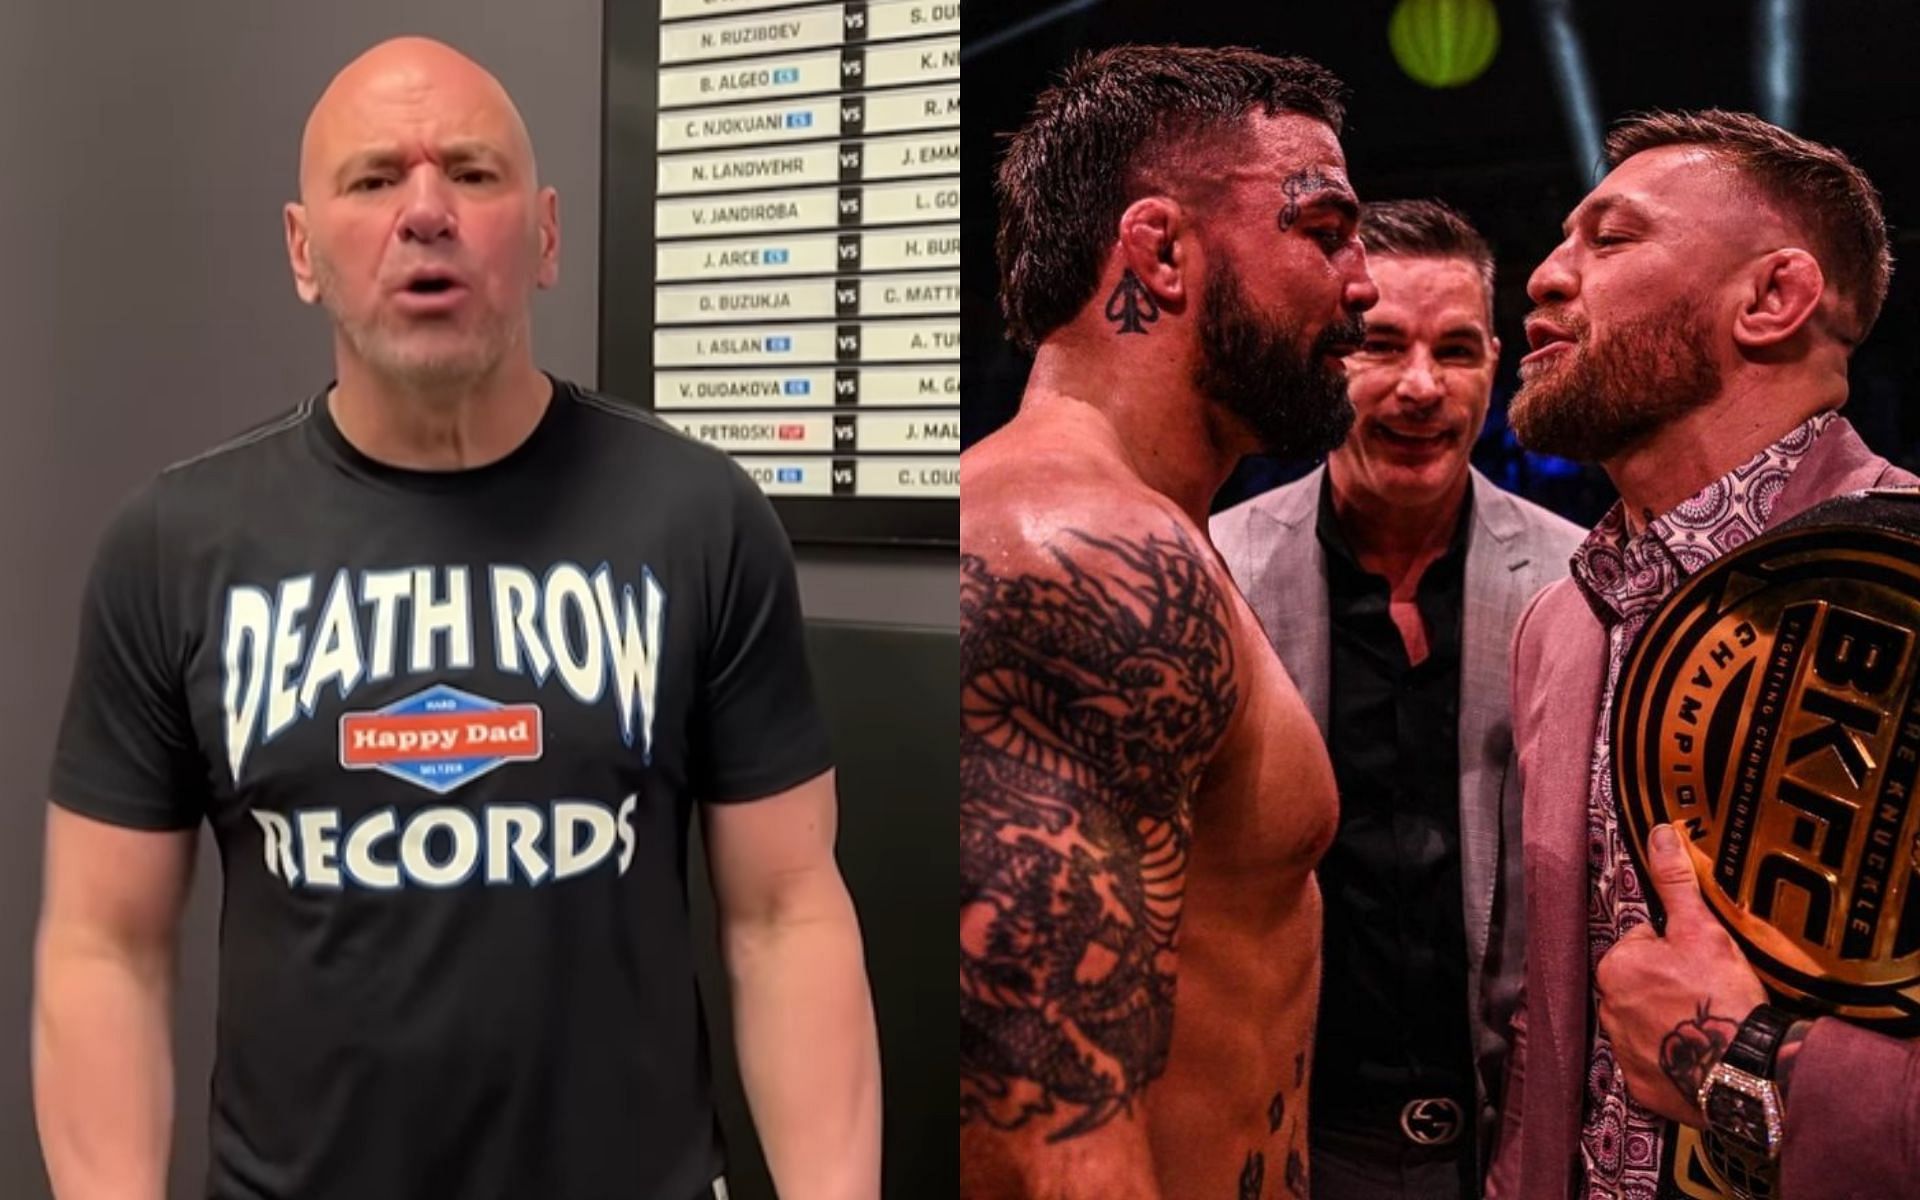 When Dana White (left) reacted to Mike Perry (middle) and Conor McGregor (right) face off at BKFC event [Image courtesy @platinummikeperry and @danawhite on Instagram]